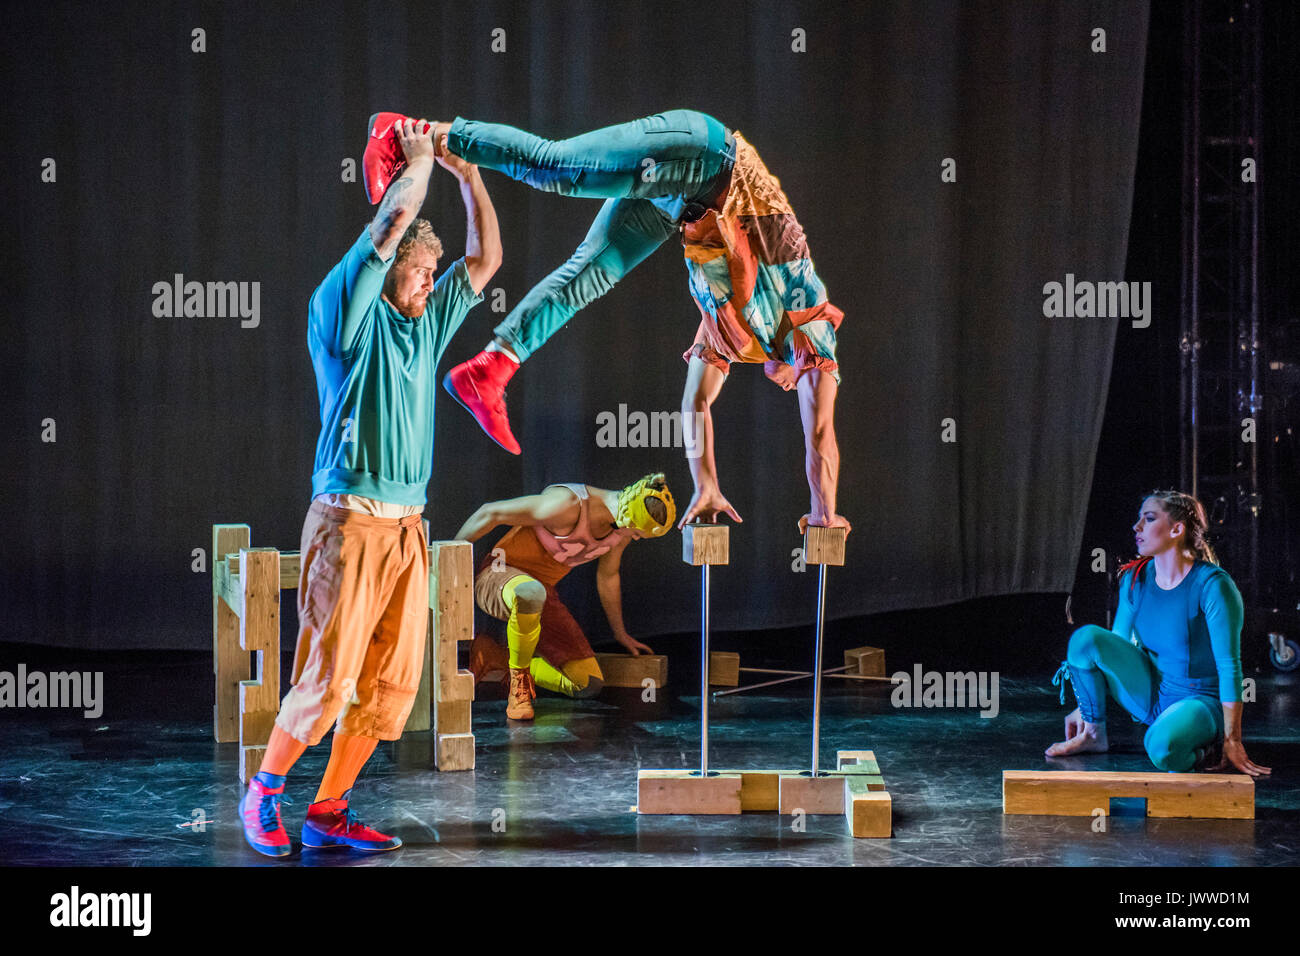 London, UK. 14th August, 2017. Hand balancing by Einar Kling-Odencrants - Cirkus Cirkör perform the UK premiere of Limits at Southbank Centre's Royal Festival Hall. A Scandinavian contemporary circus company which combines energy with acrobatic artistry. The current show was conceived by Founder and Artistic Director Tilde Björfors as part of his trilogy exploring migration. London 14 Aug 2017. Credit: Guy Bell/Alamy Live News Stock Photo